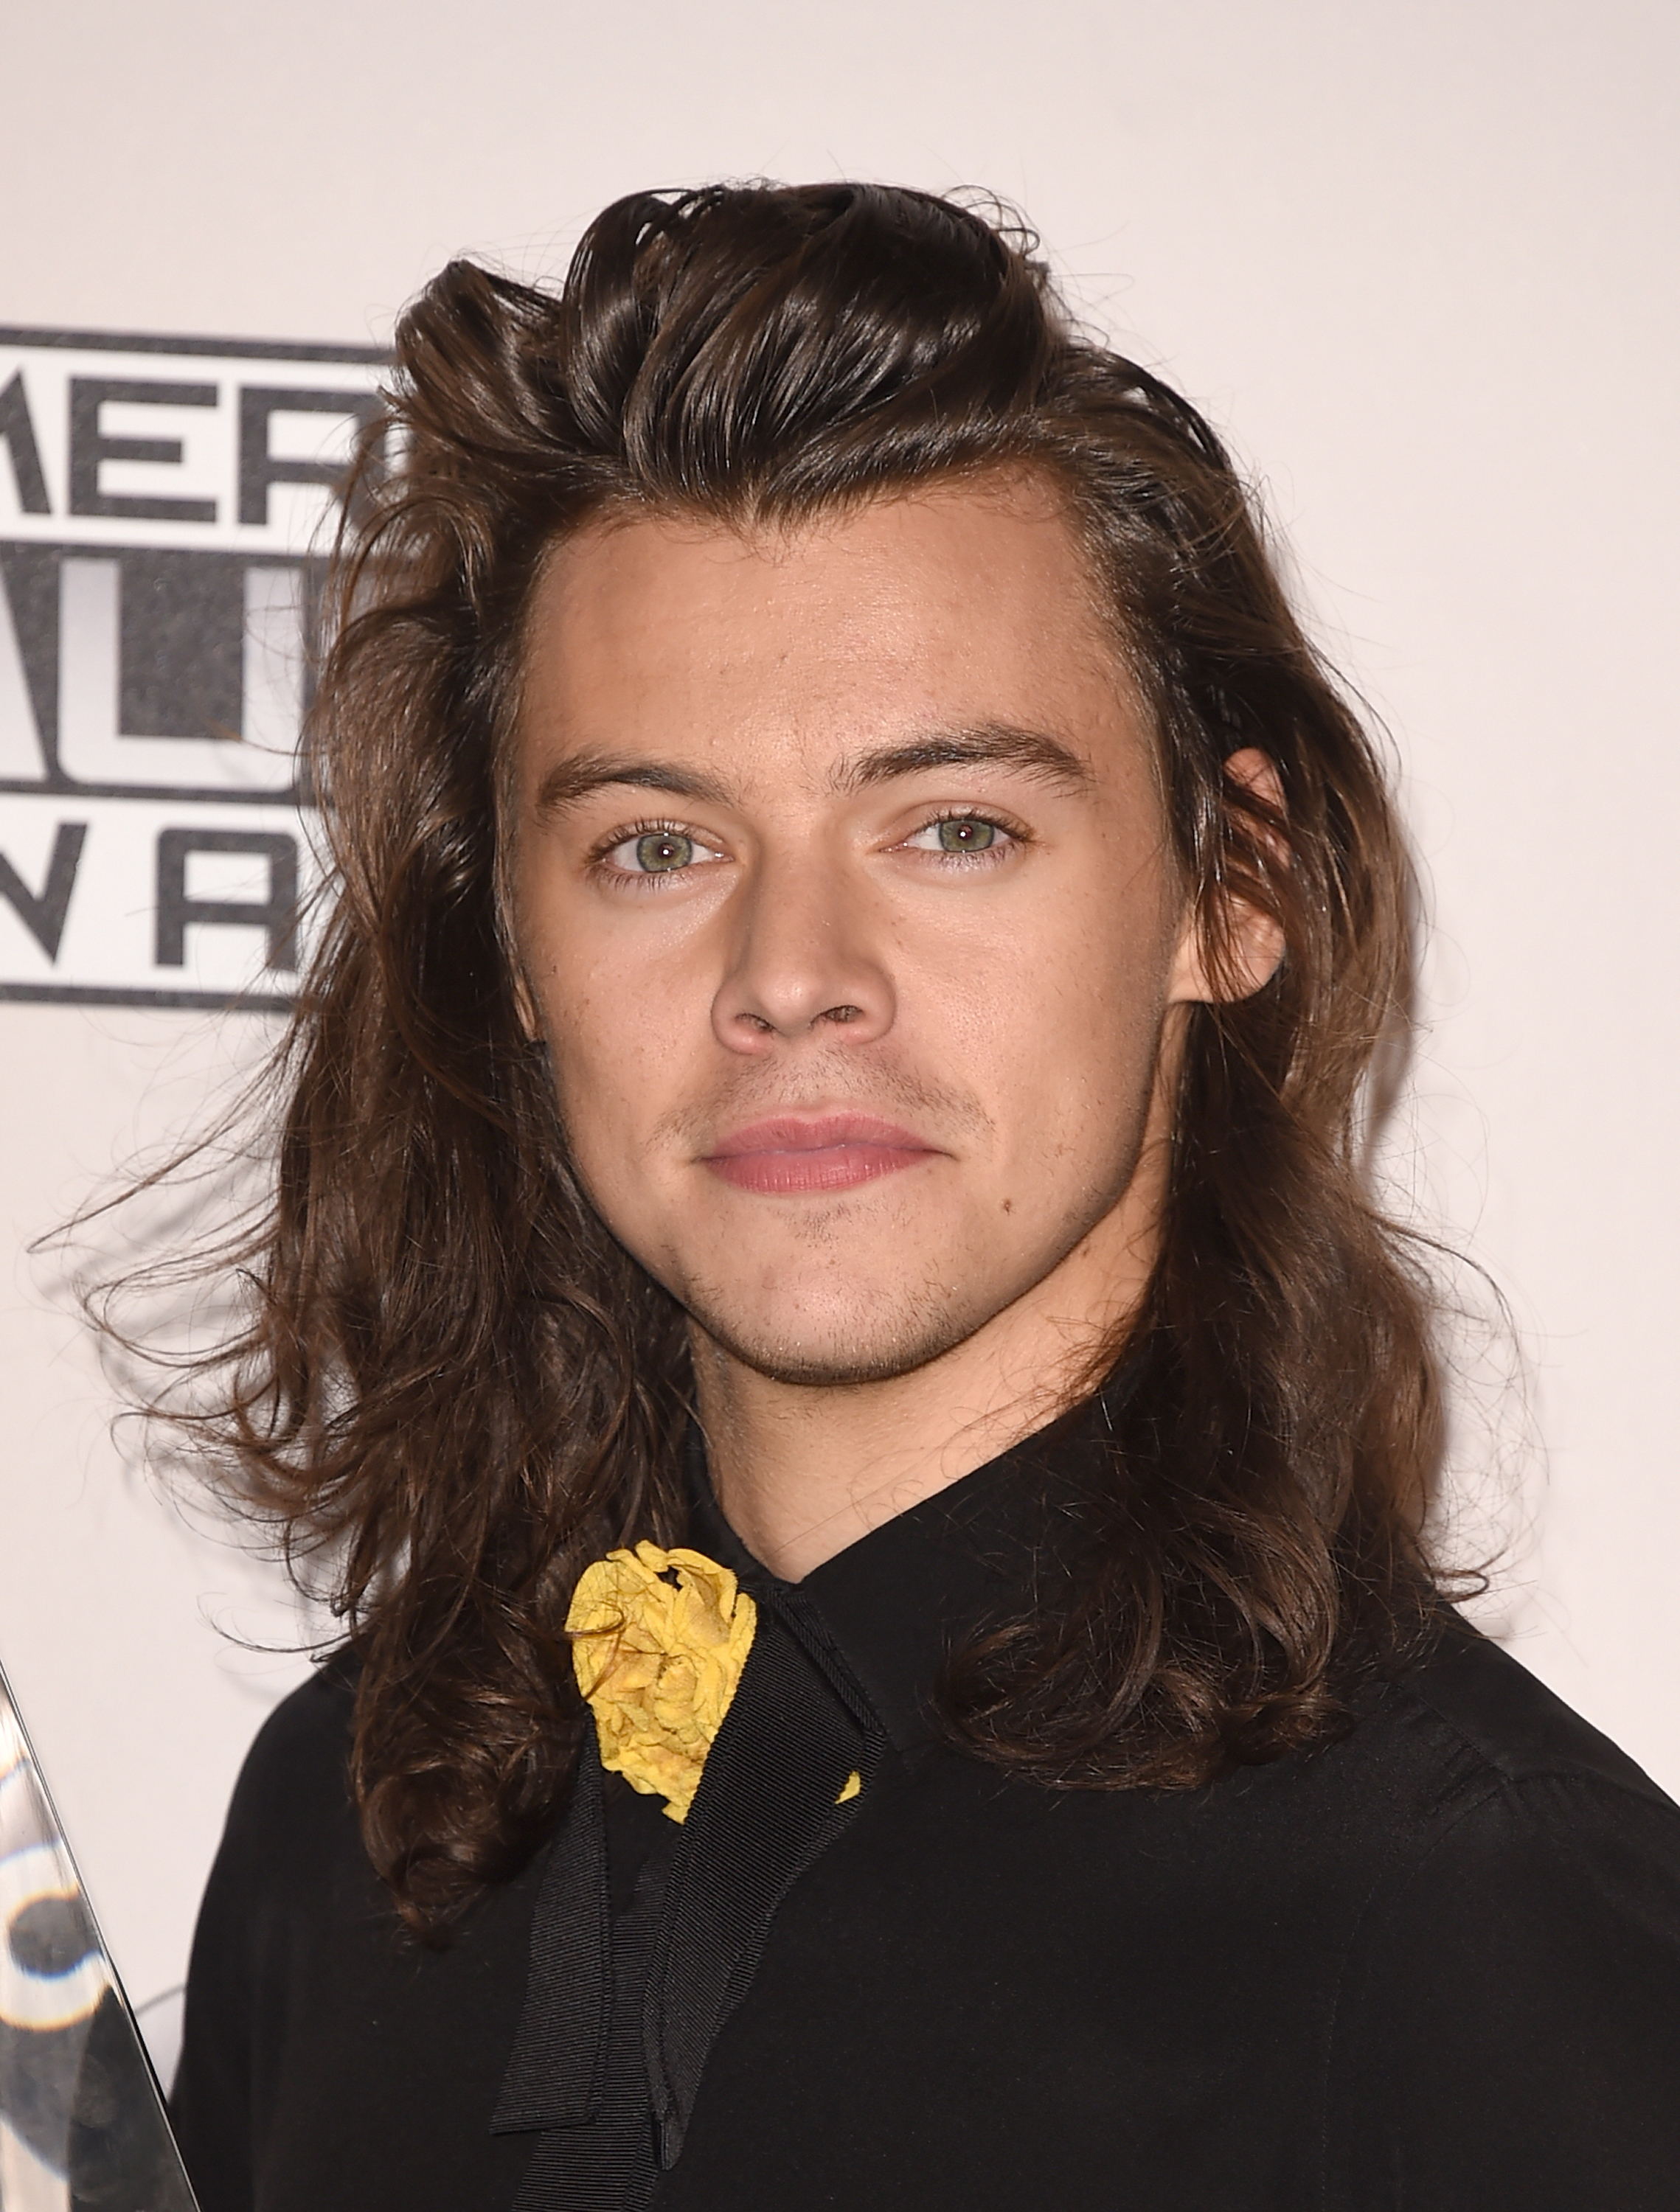 Why Did Harry Styles Cut His Hair Short? It Wasn't Just For Charity